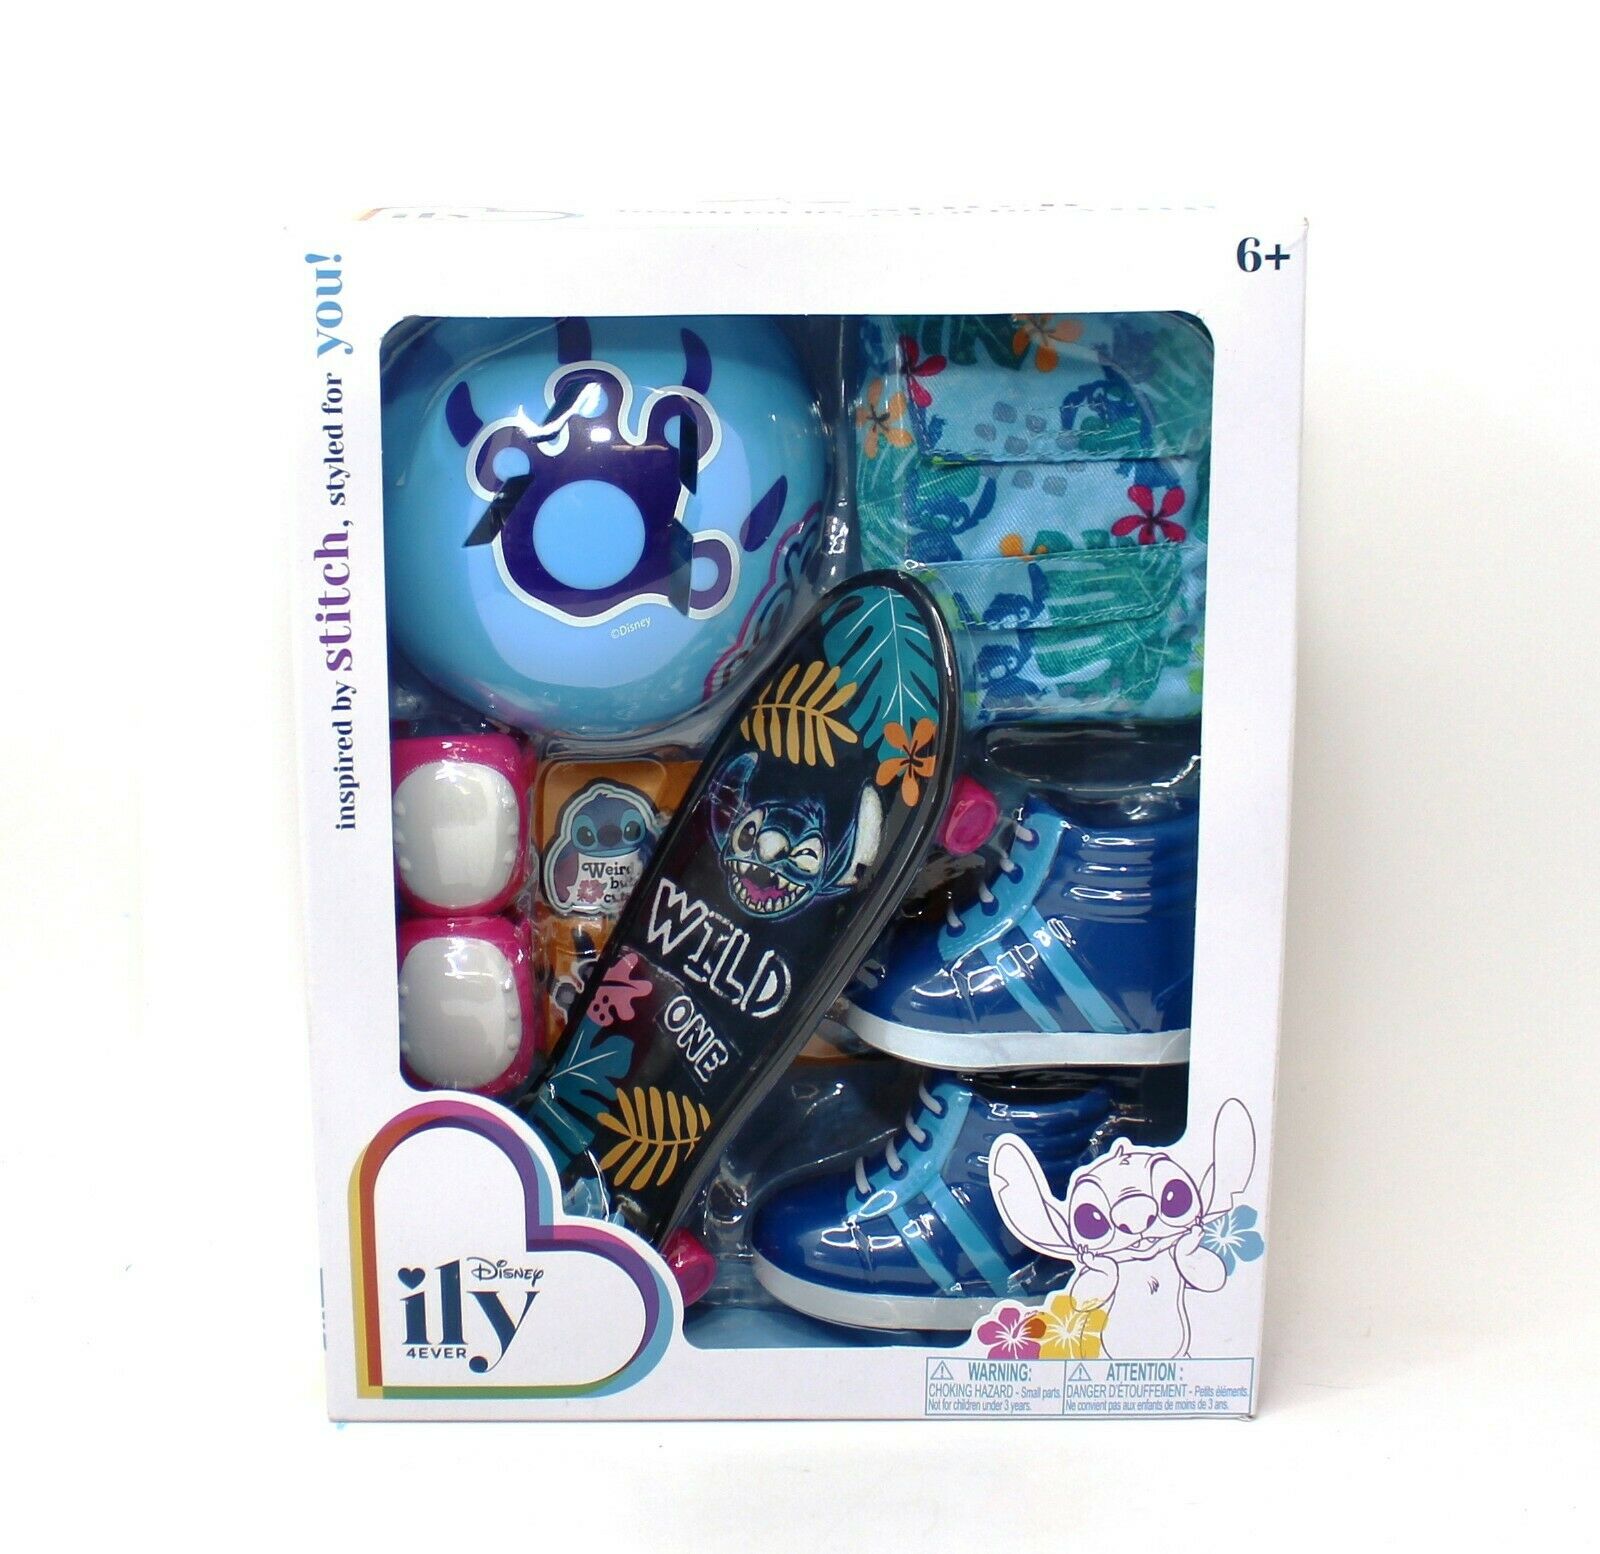 Disney ILY 4Ever Inspired by Stitch Accessory Pack, Multicolor, 221151